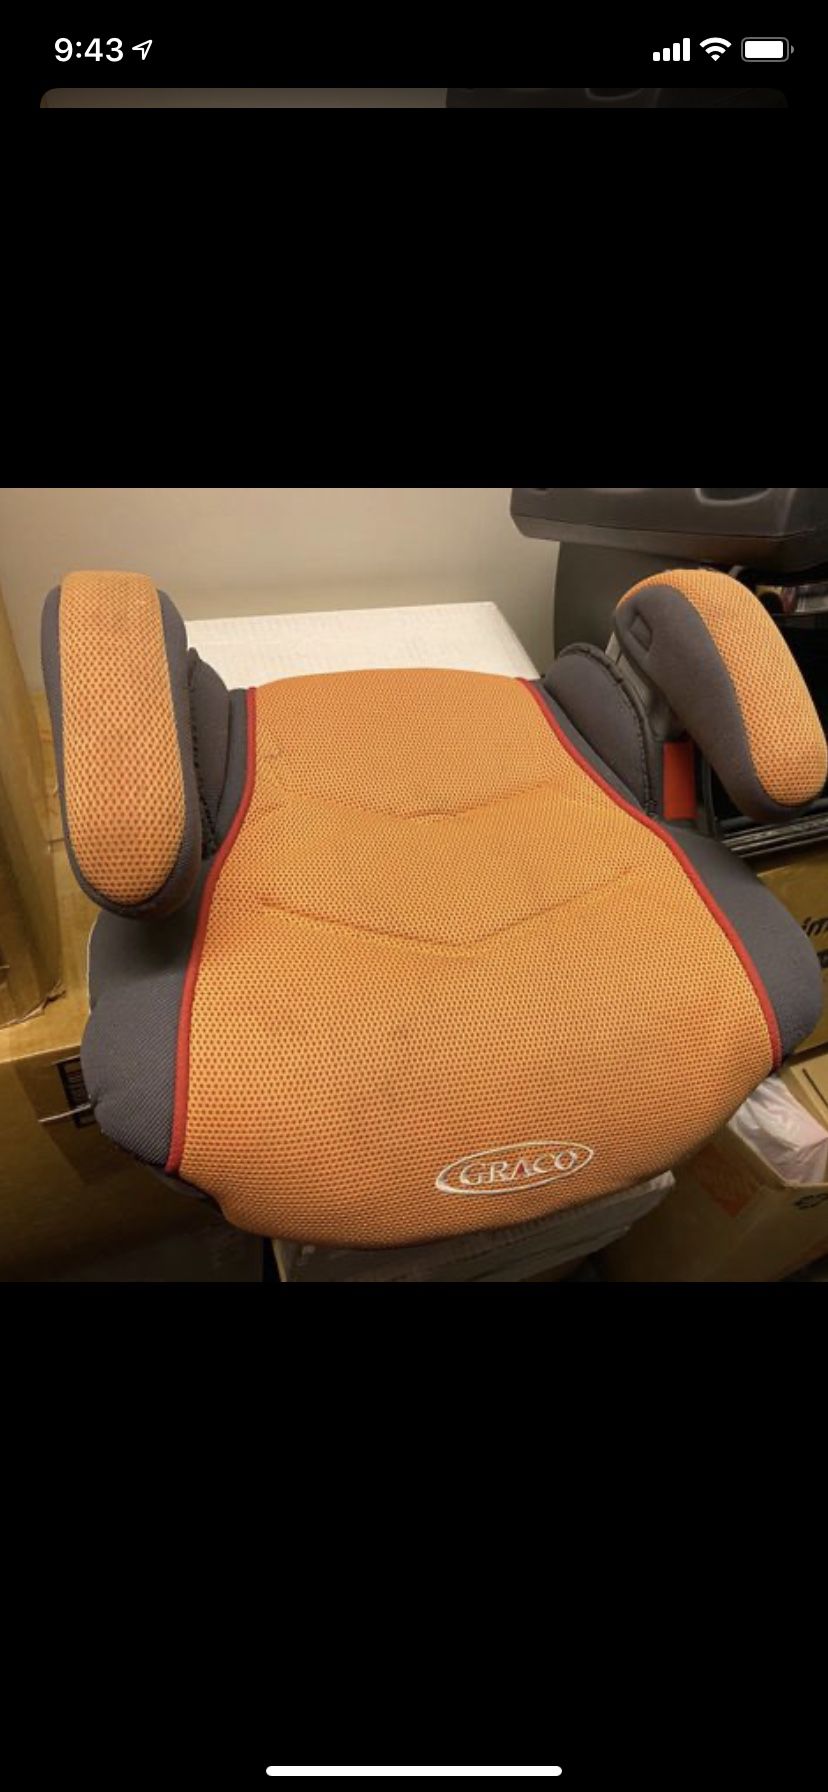 2 backless booster seats